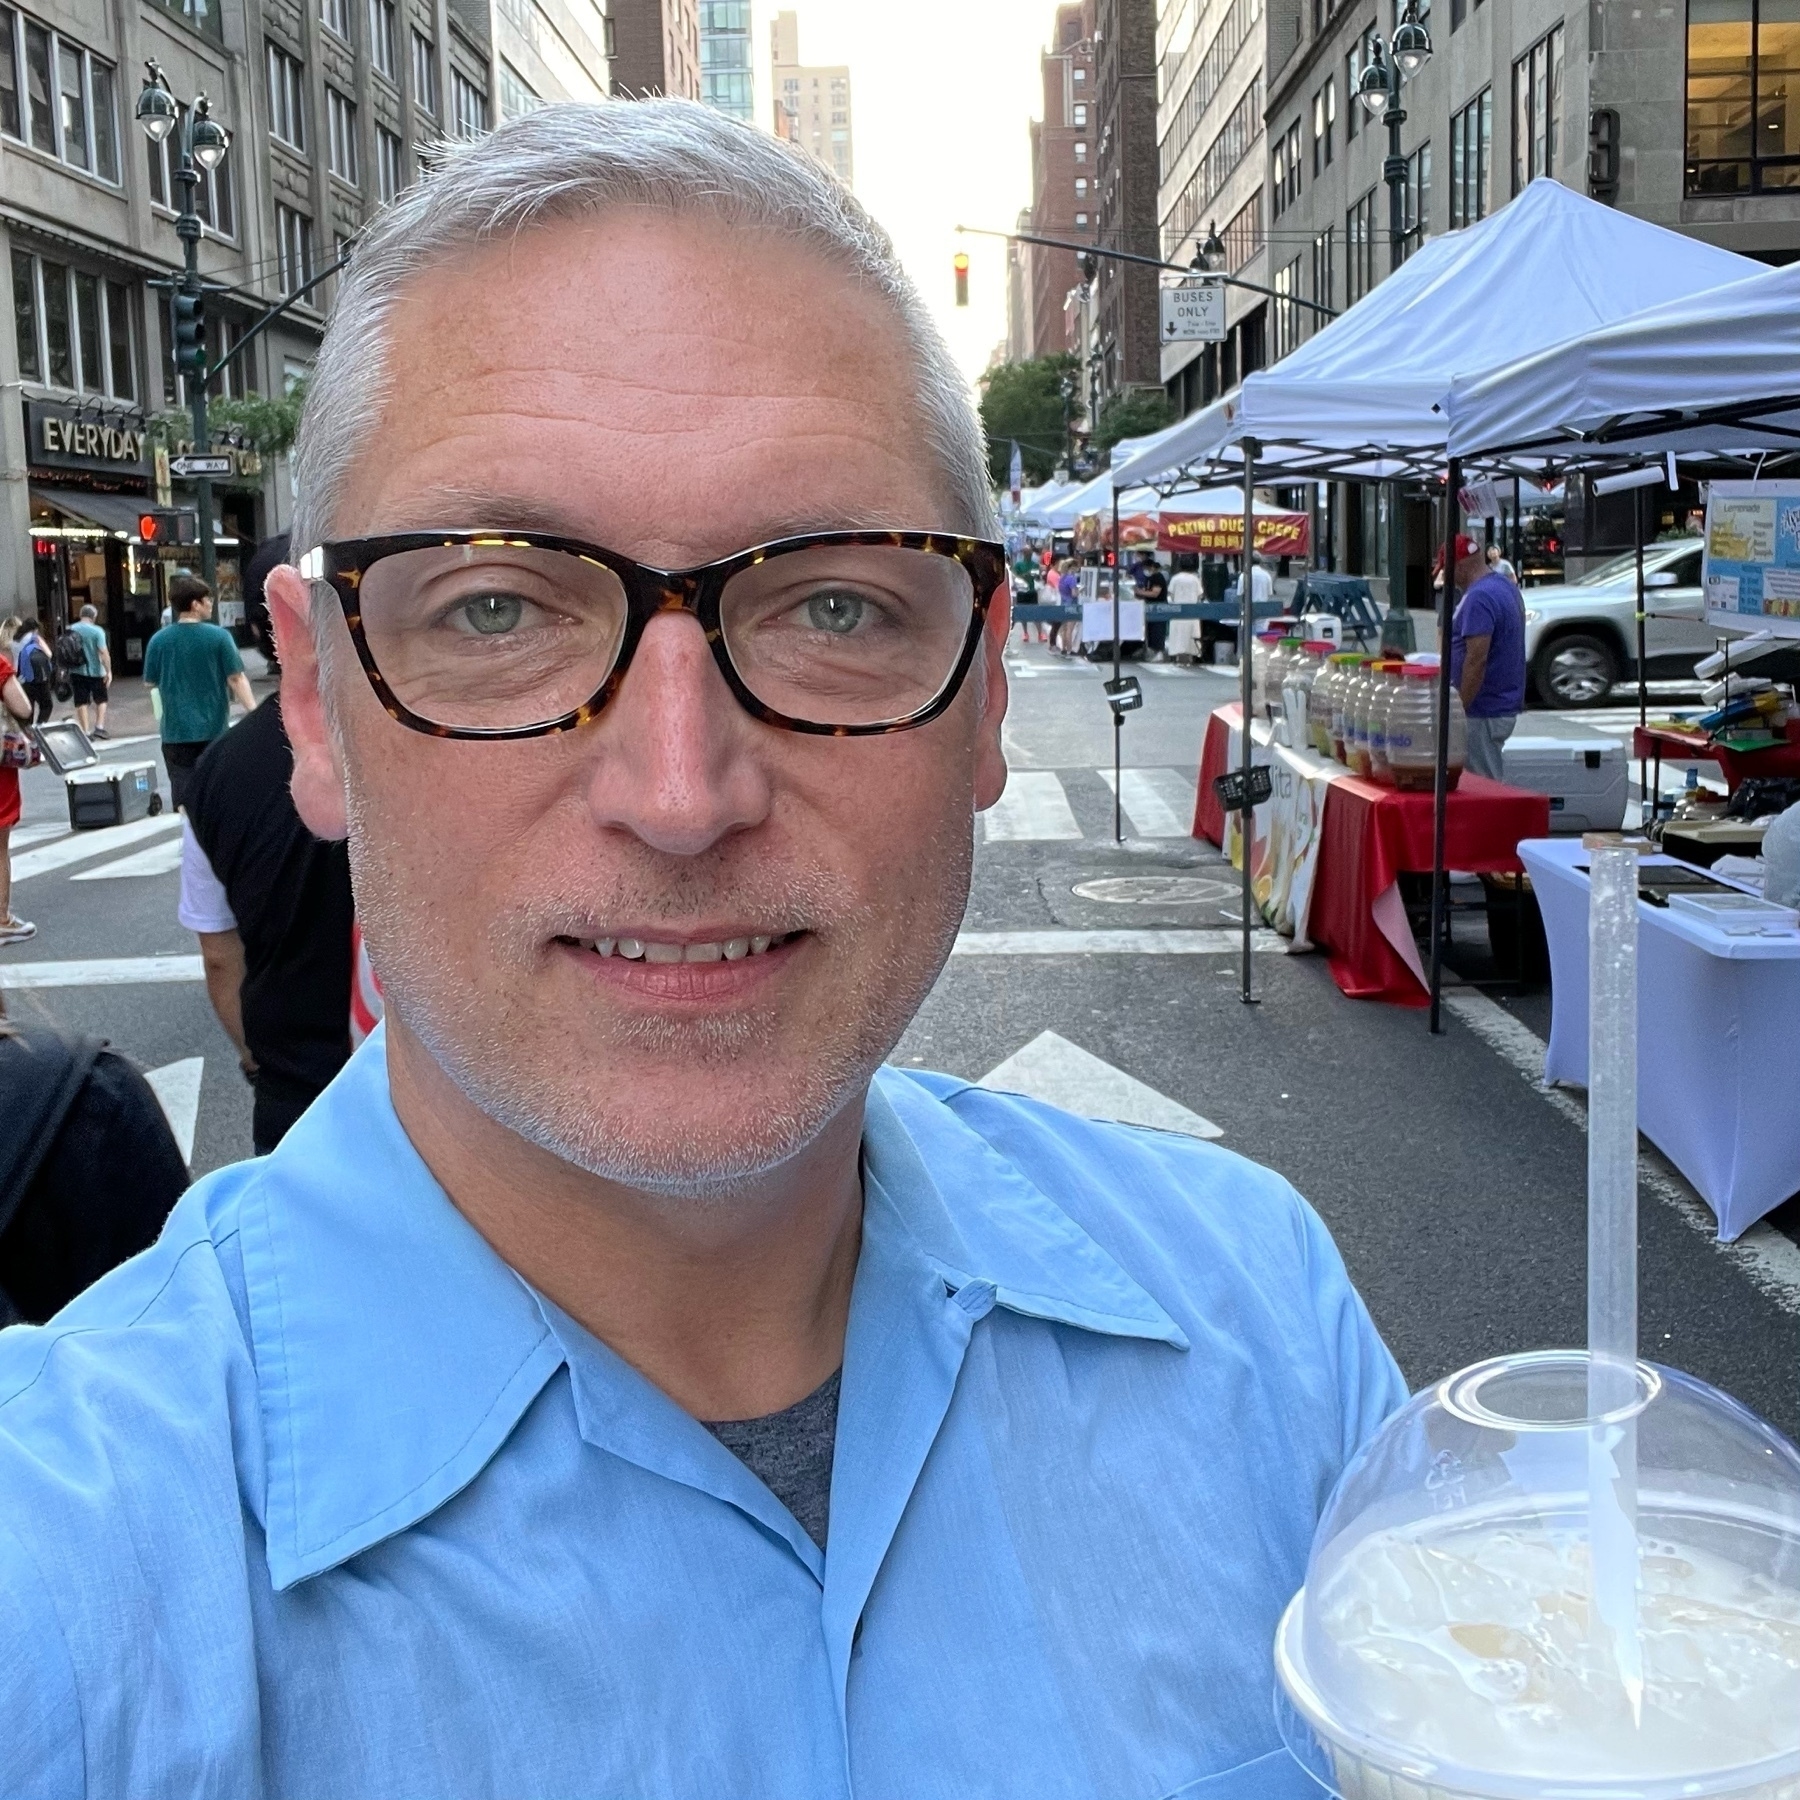 selfie on nyc street holding a plastic cup with horchata drink